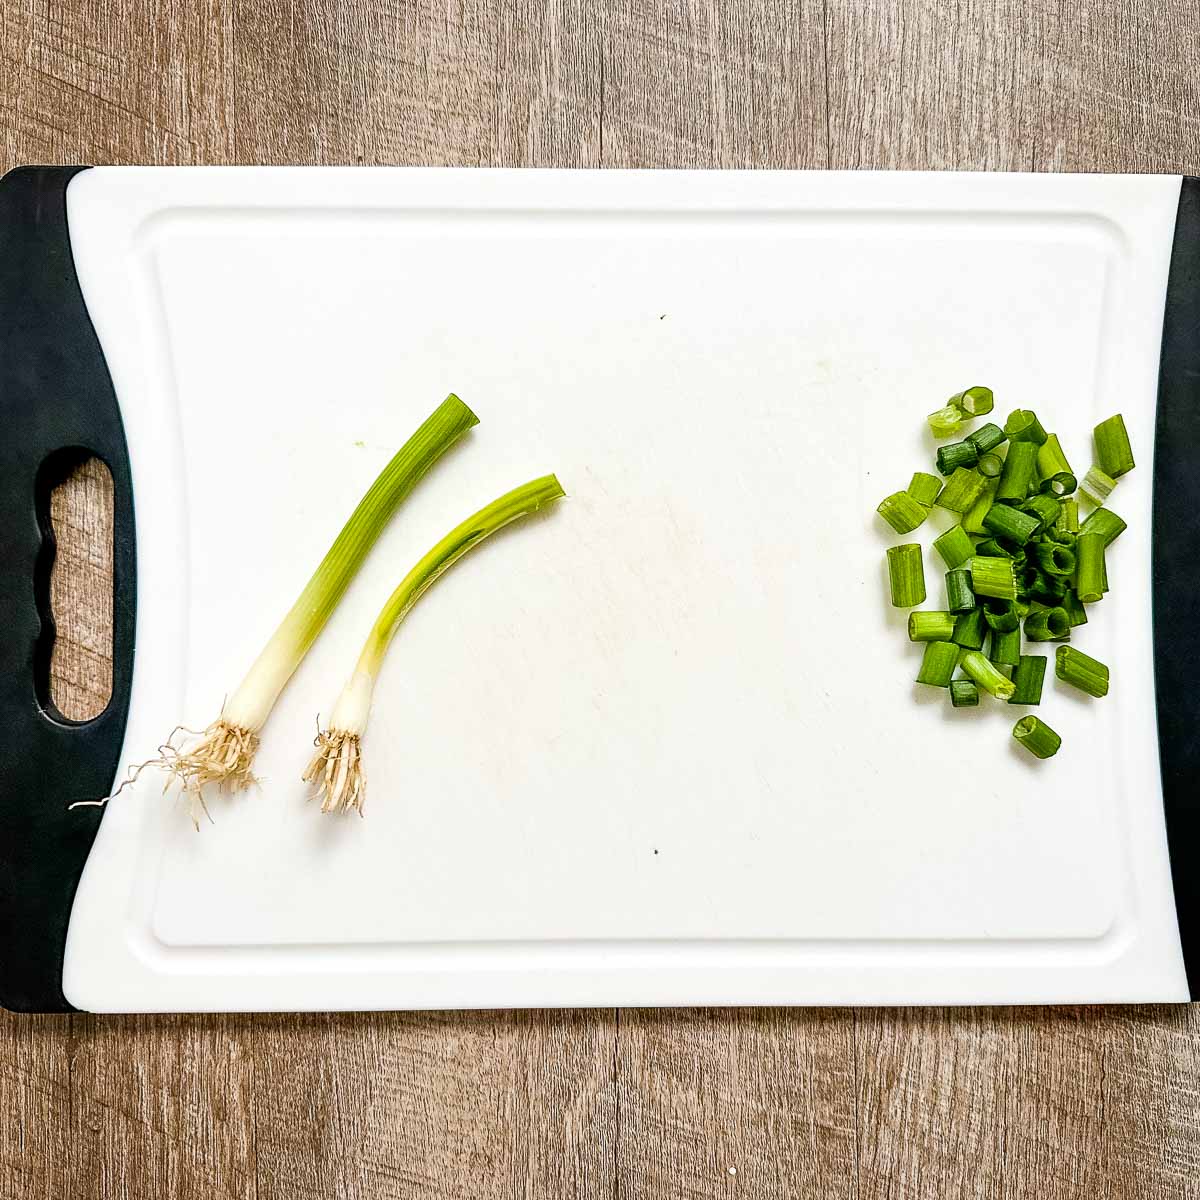 Two scallions are in the process of being chopped on a white cutting board.